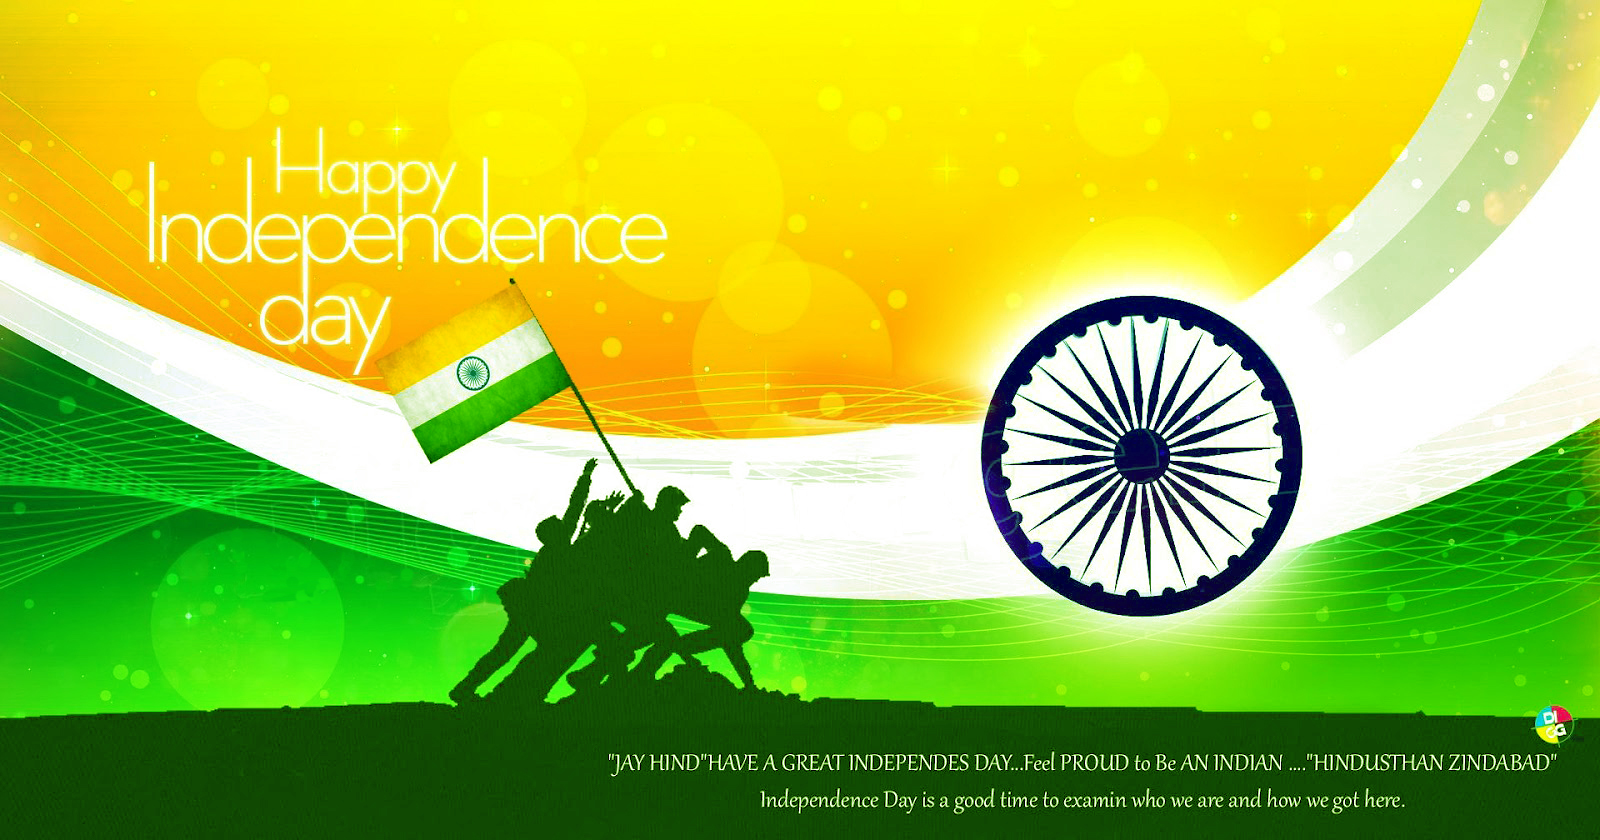 India Independence Day Whatsapp Dp Images & Wallpapers - Indian Independence Day 2016 - HD Wallpaper 